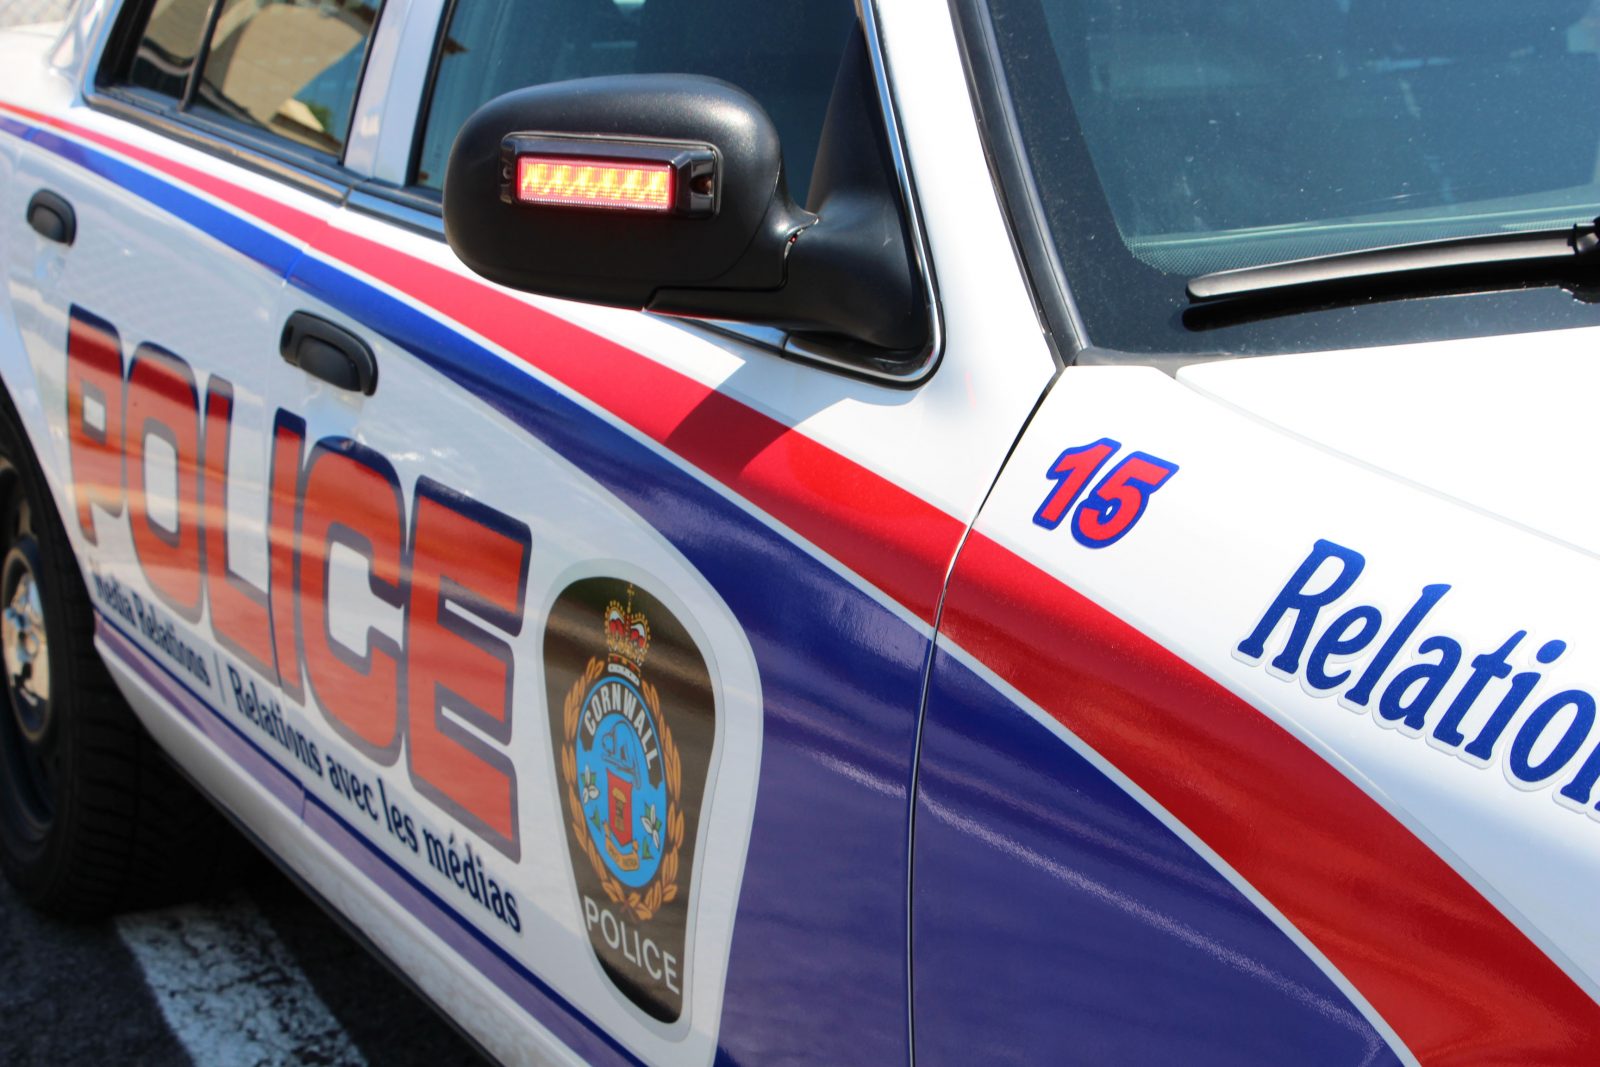 Three women arrested after impaired driving investigation